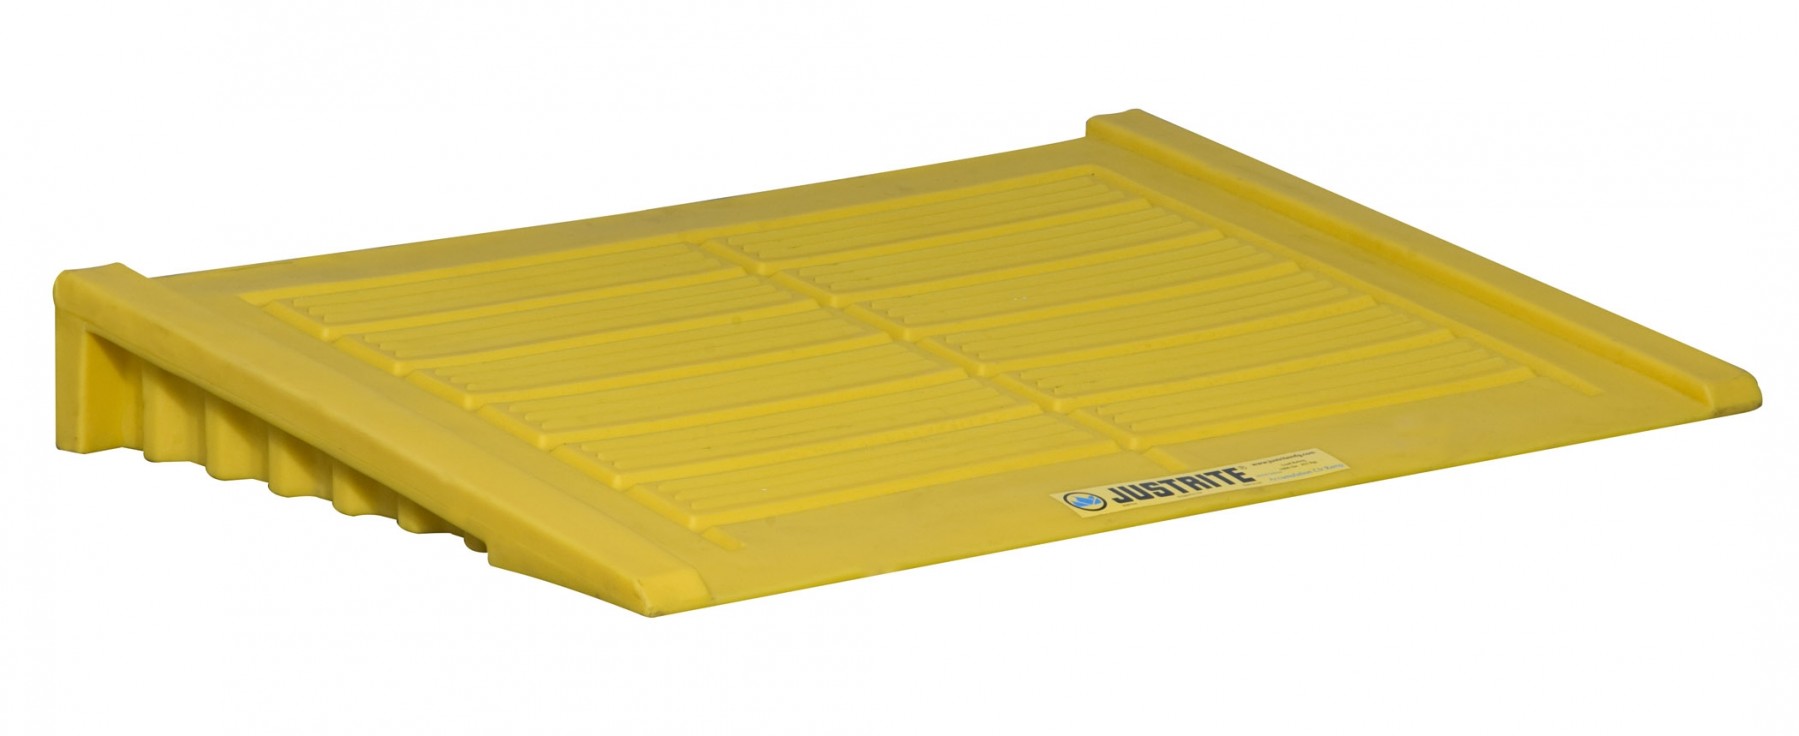 JUSTRITE YELLOW RAMP FOR 2 DRUM AND LARGE ACCUMULATION CENTRE (NON-RECYCLED)